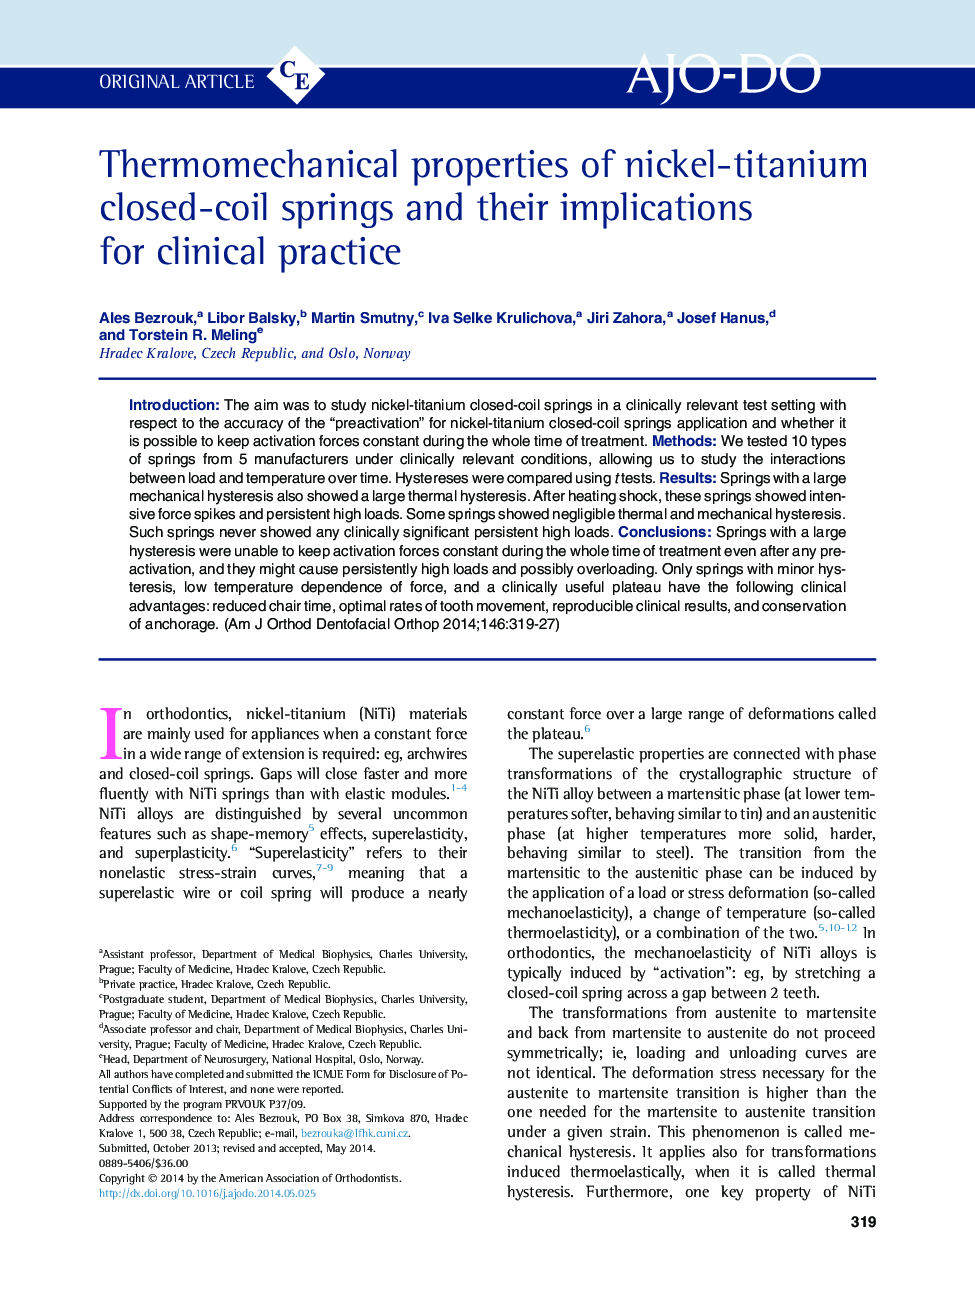 Thermomechanical properties of nickel-titanium closed-coil springs and their implications for clinical practice 